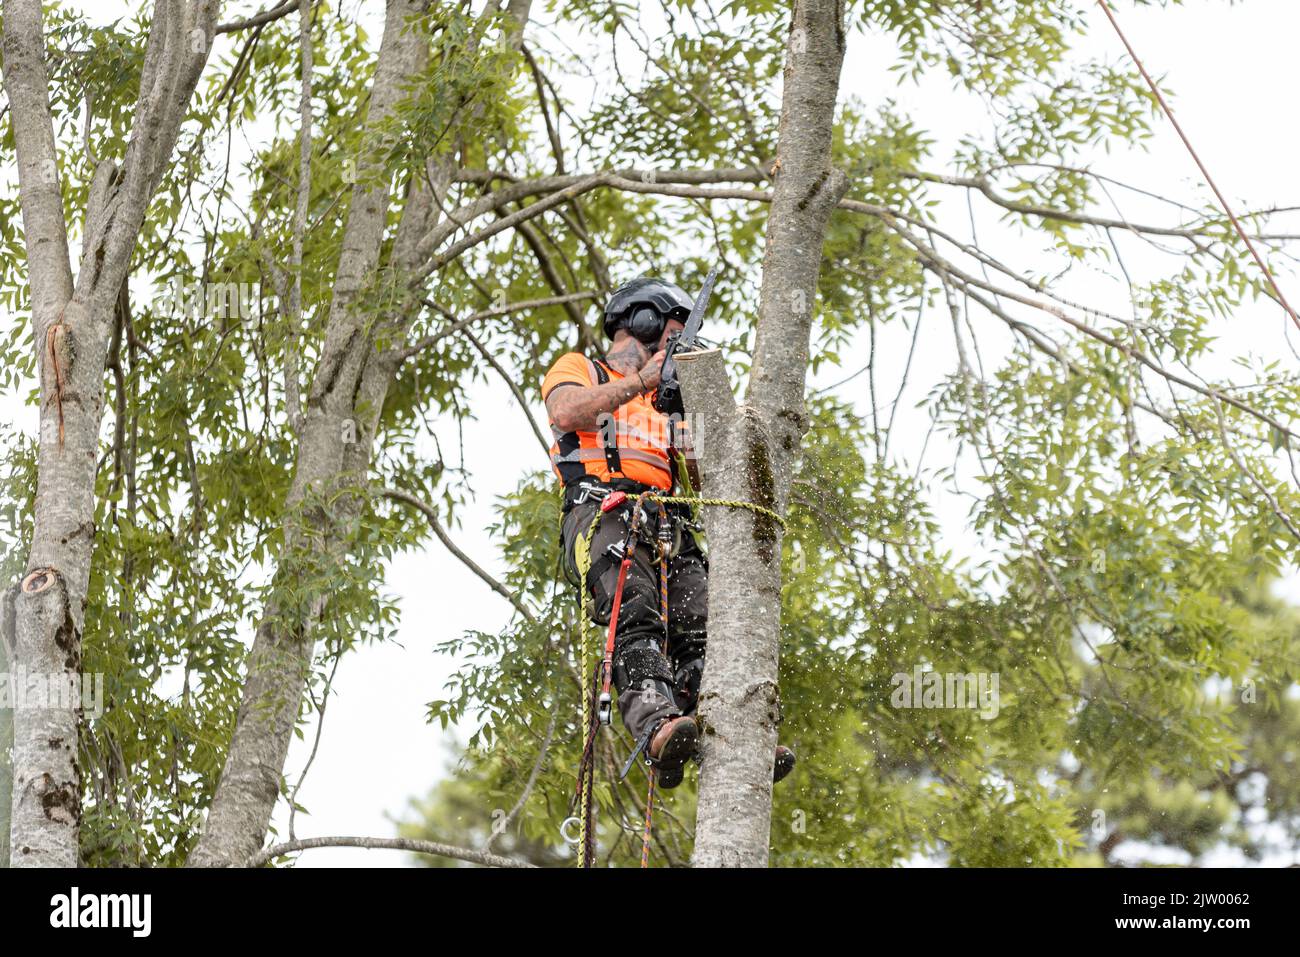 Tree surgeon cutting branches off trees  with chain saw with safety gear Stock Photo